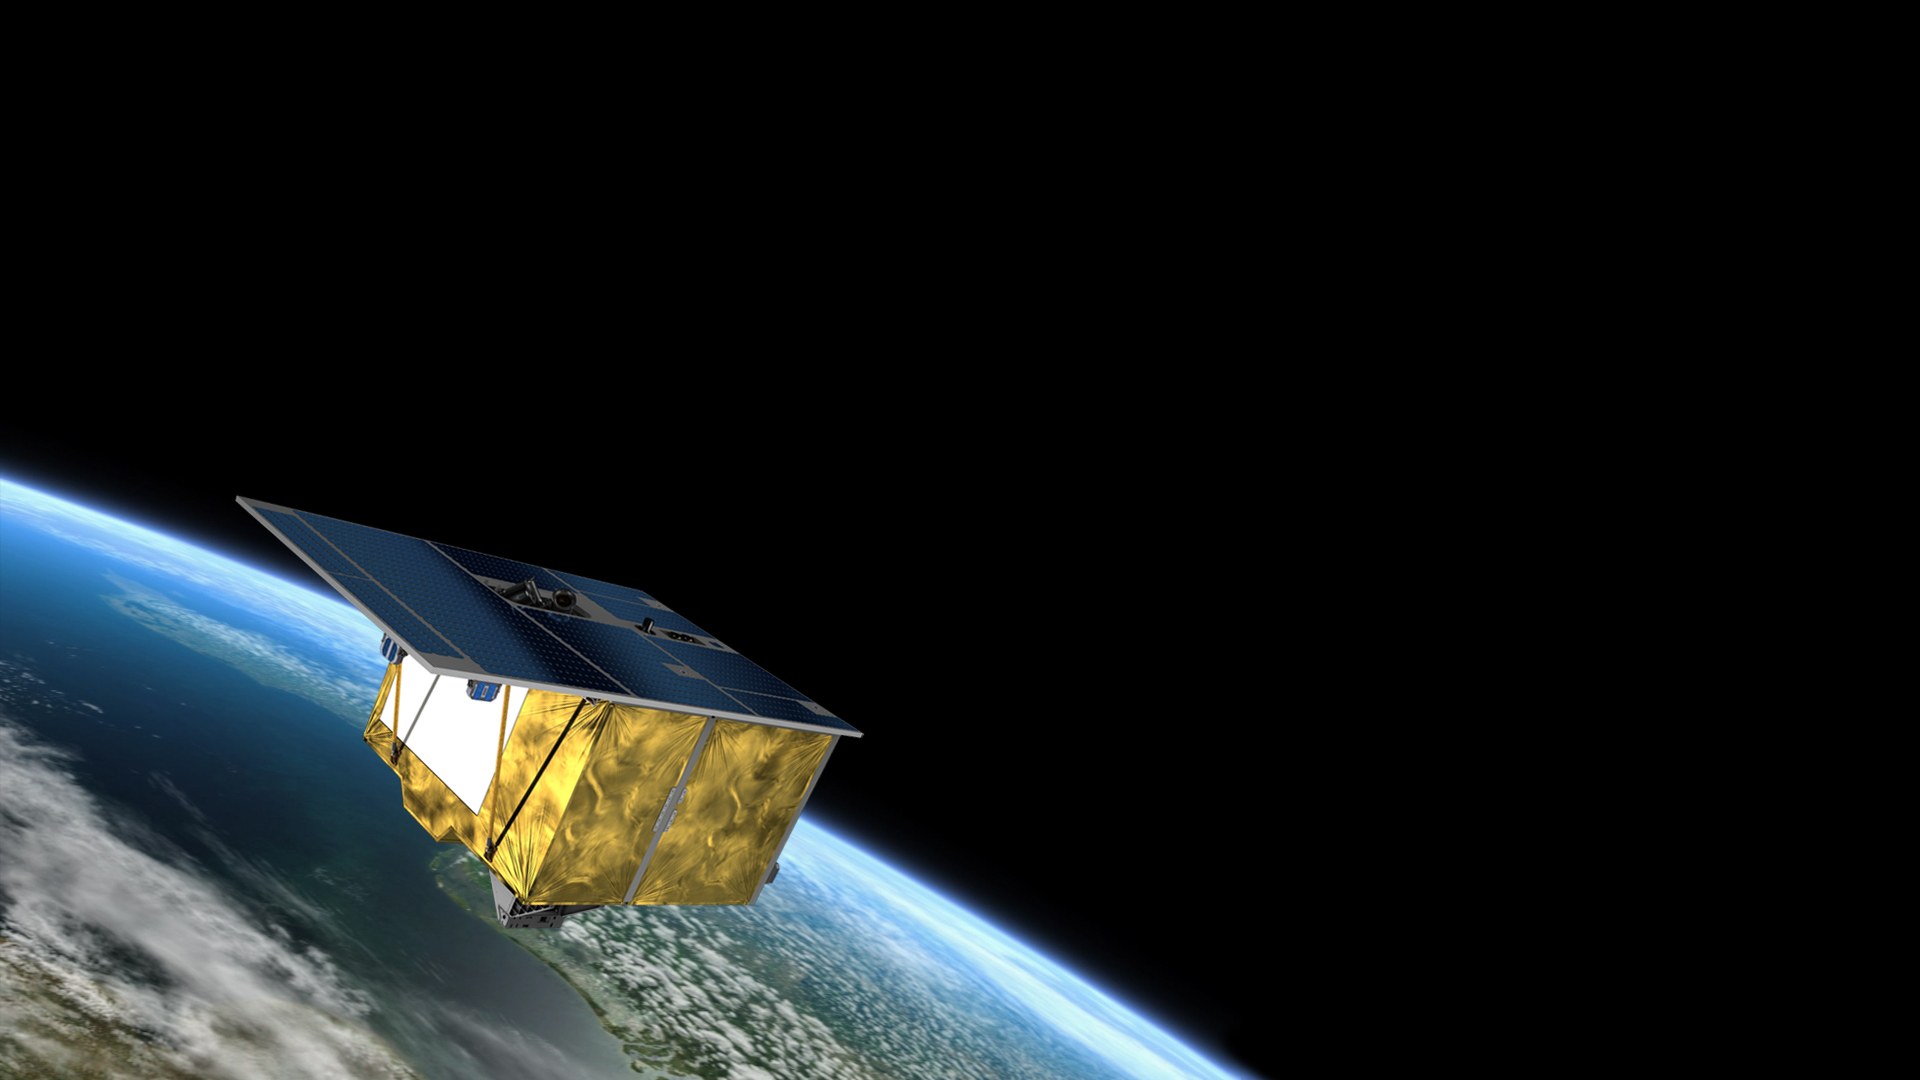 The German environmental satellite EnMAP is ready for its mission in space